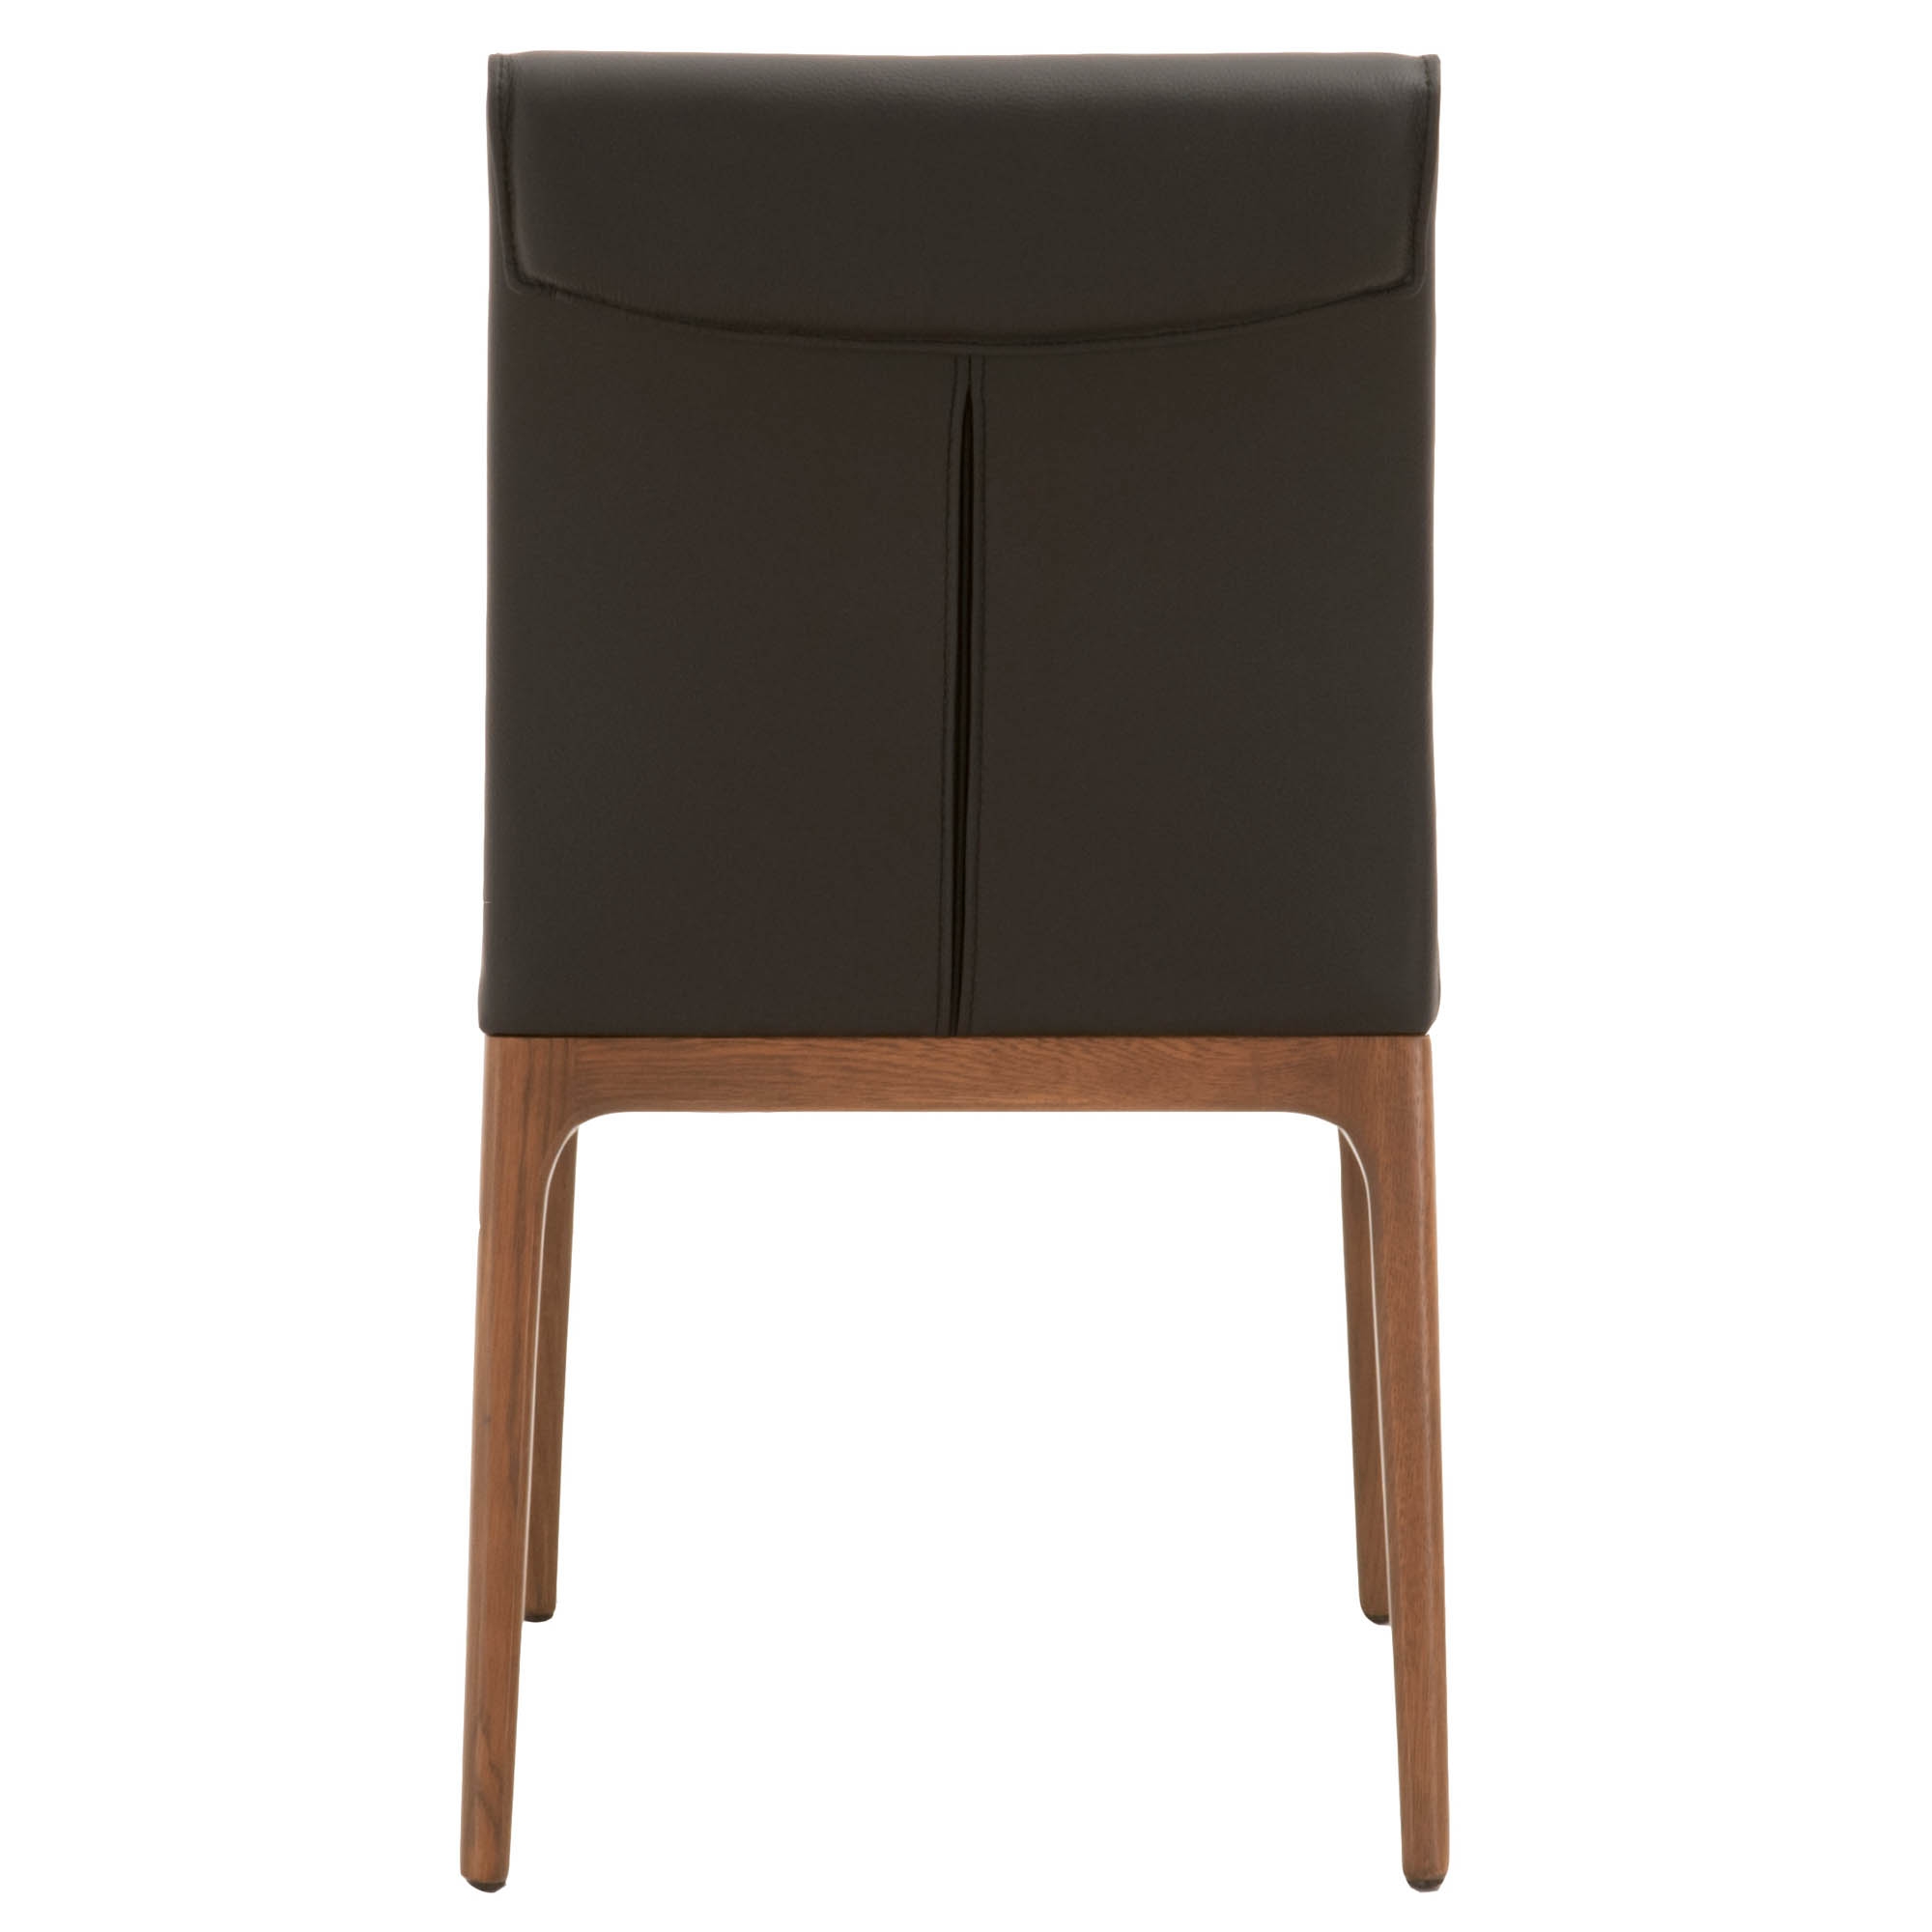 Alex Dining Chair, Sable Top Grain Leather, Set of 2 - Image 4